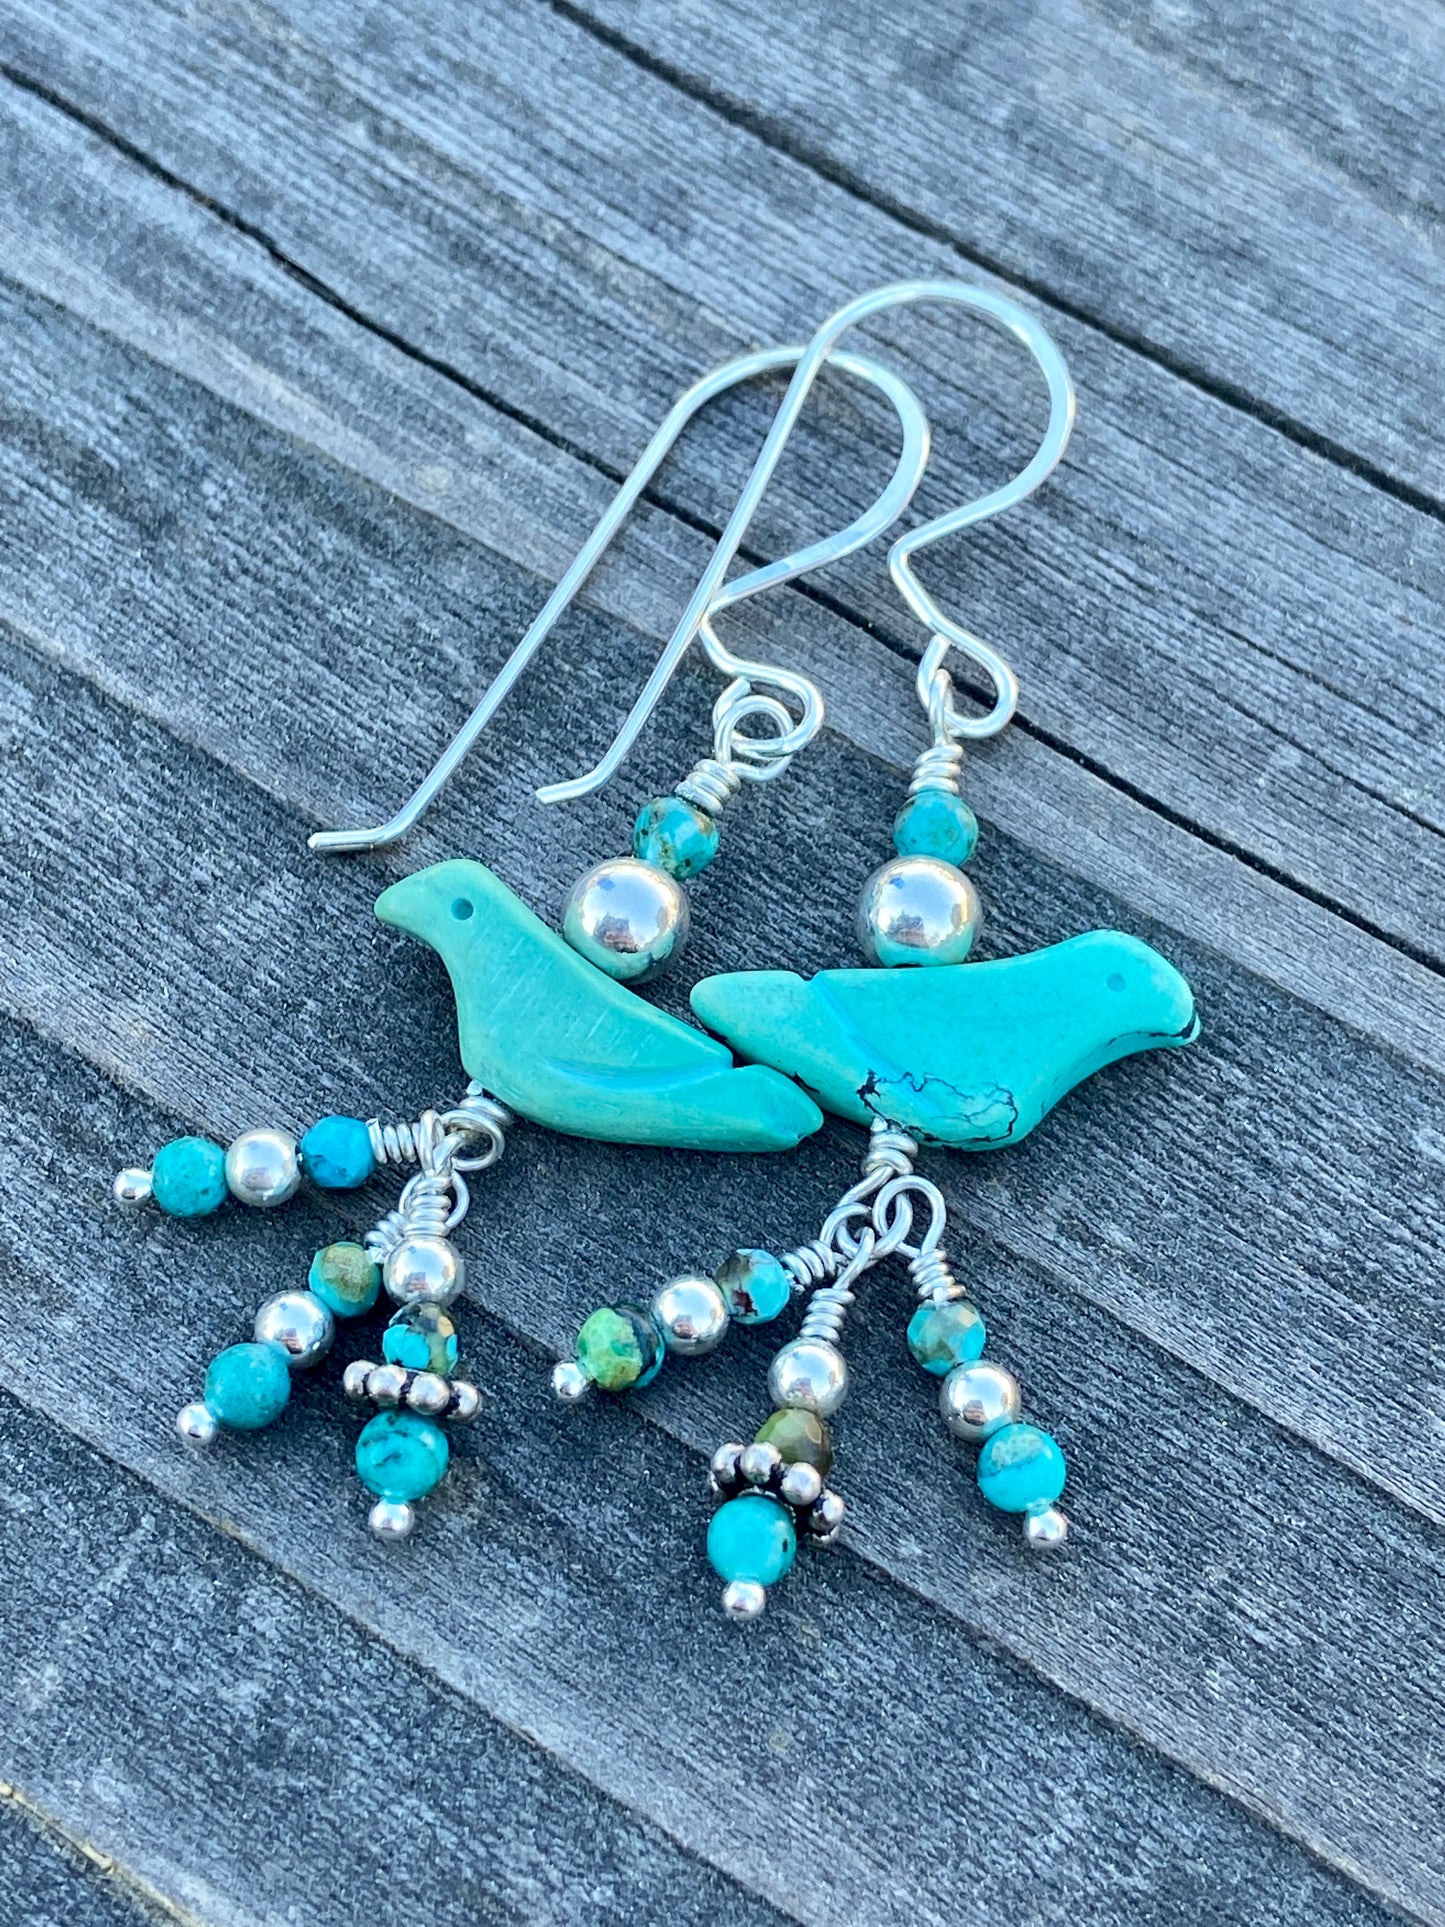 Turquoise Fetish Animal Silver Chain Necklace & Earring Set